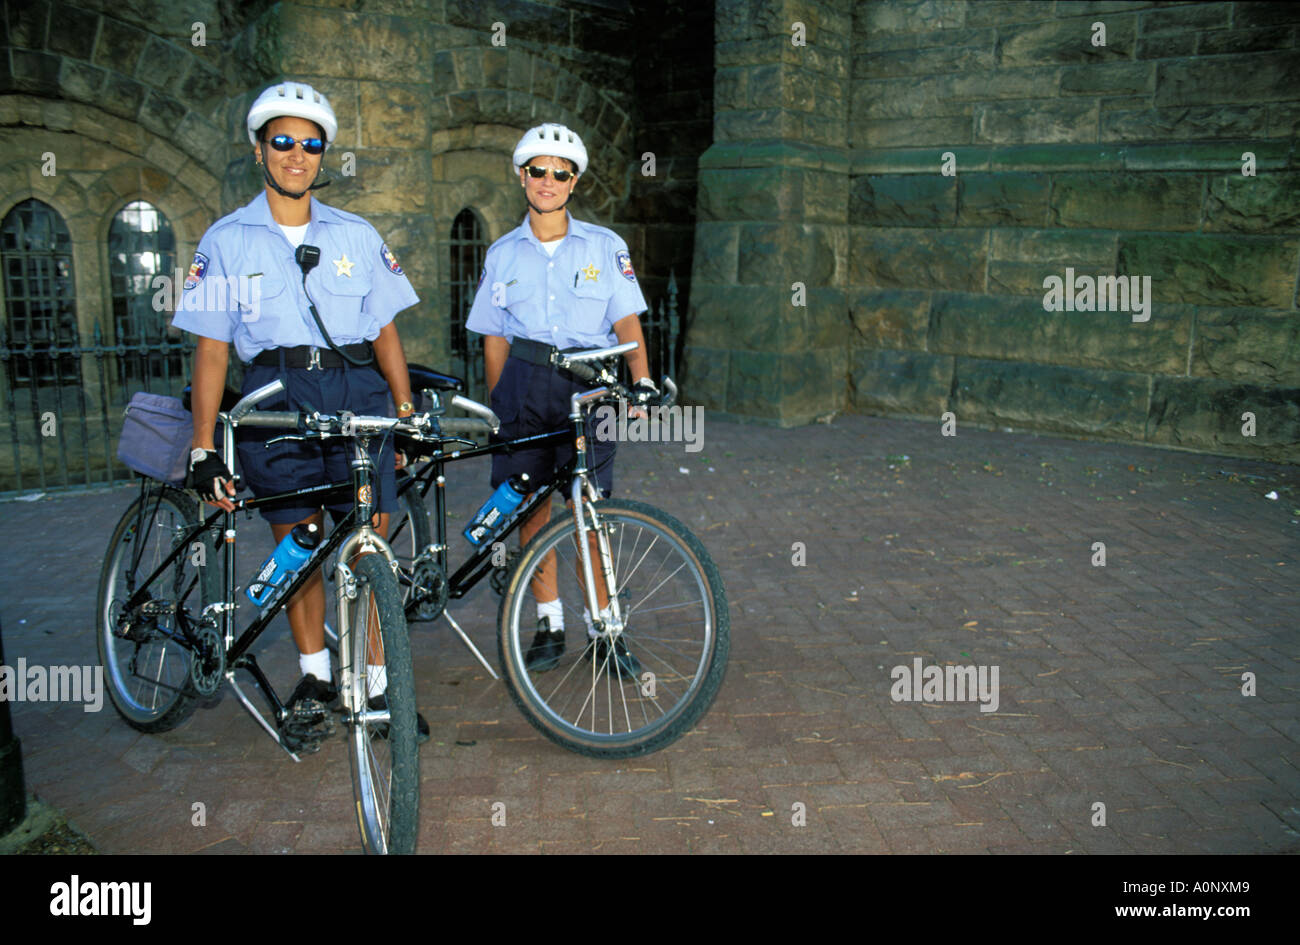 Cape Town policewomen on bicycles Stock Photo